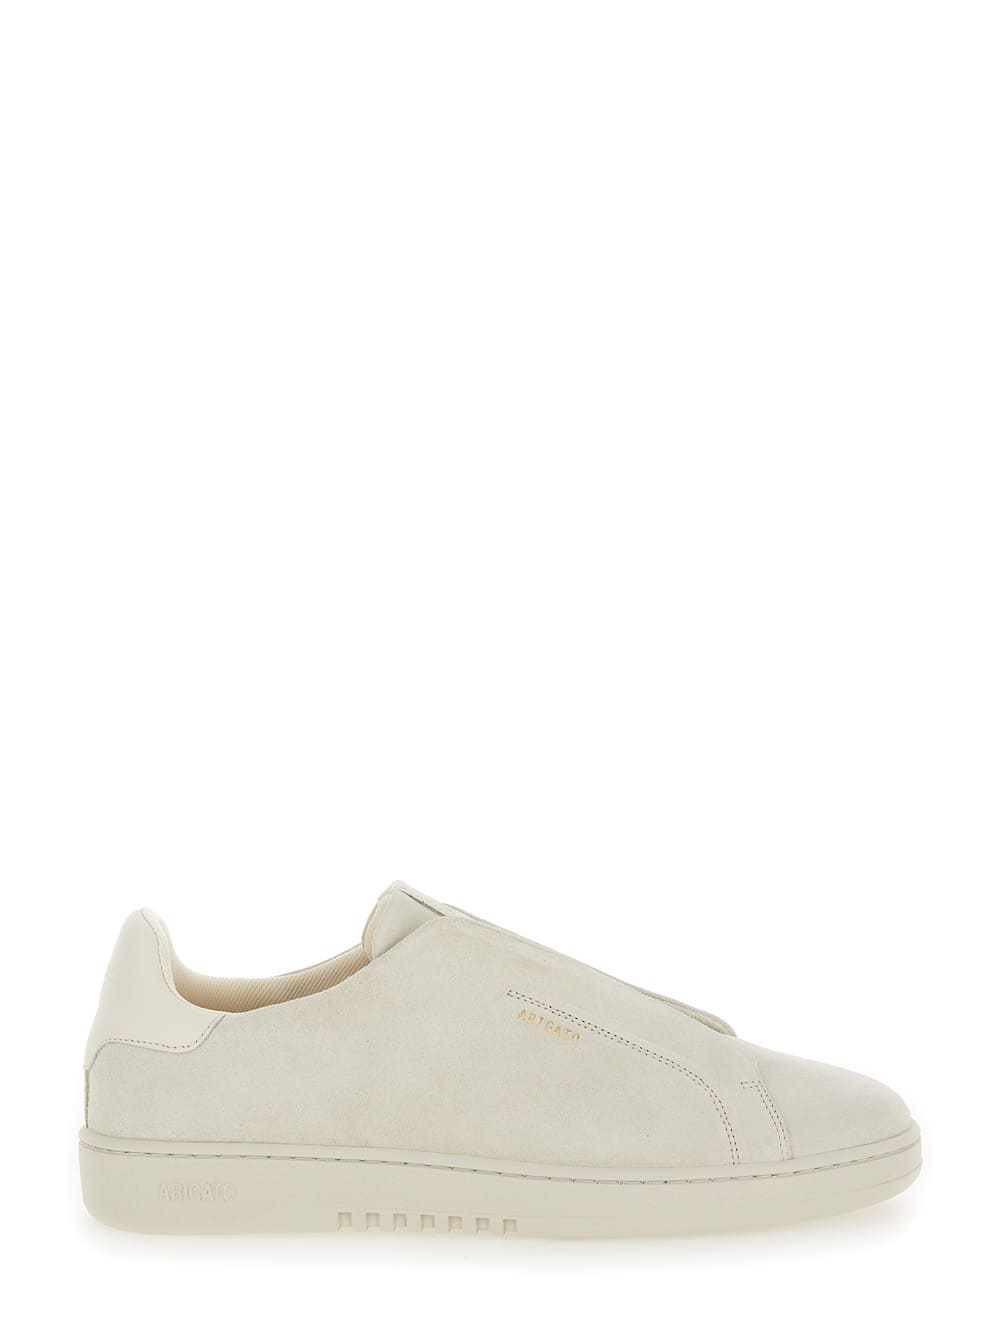 dice Laceless White Low Top Slip-on Sneakers In Suede Man